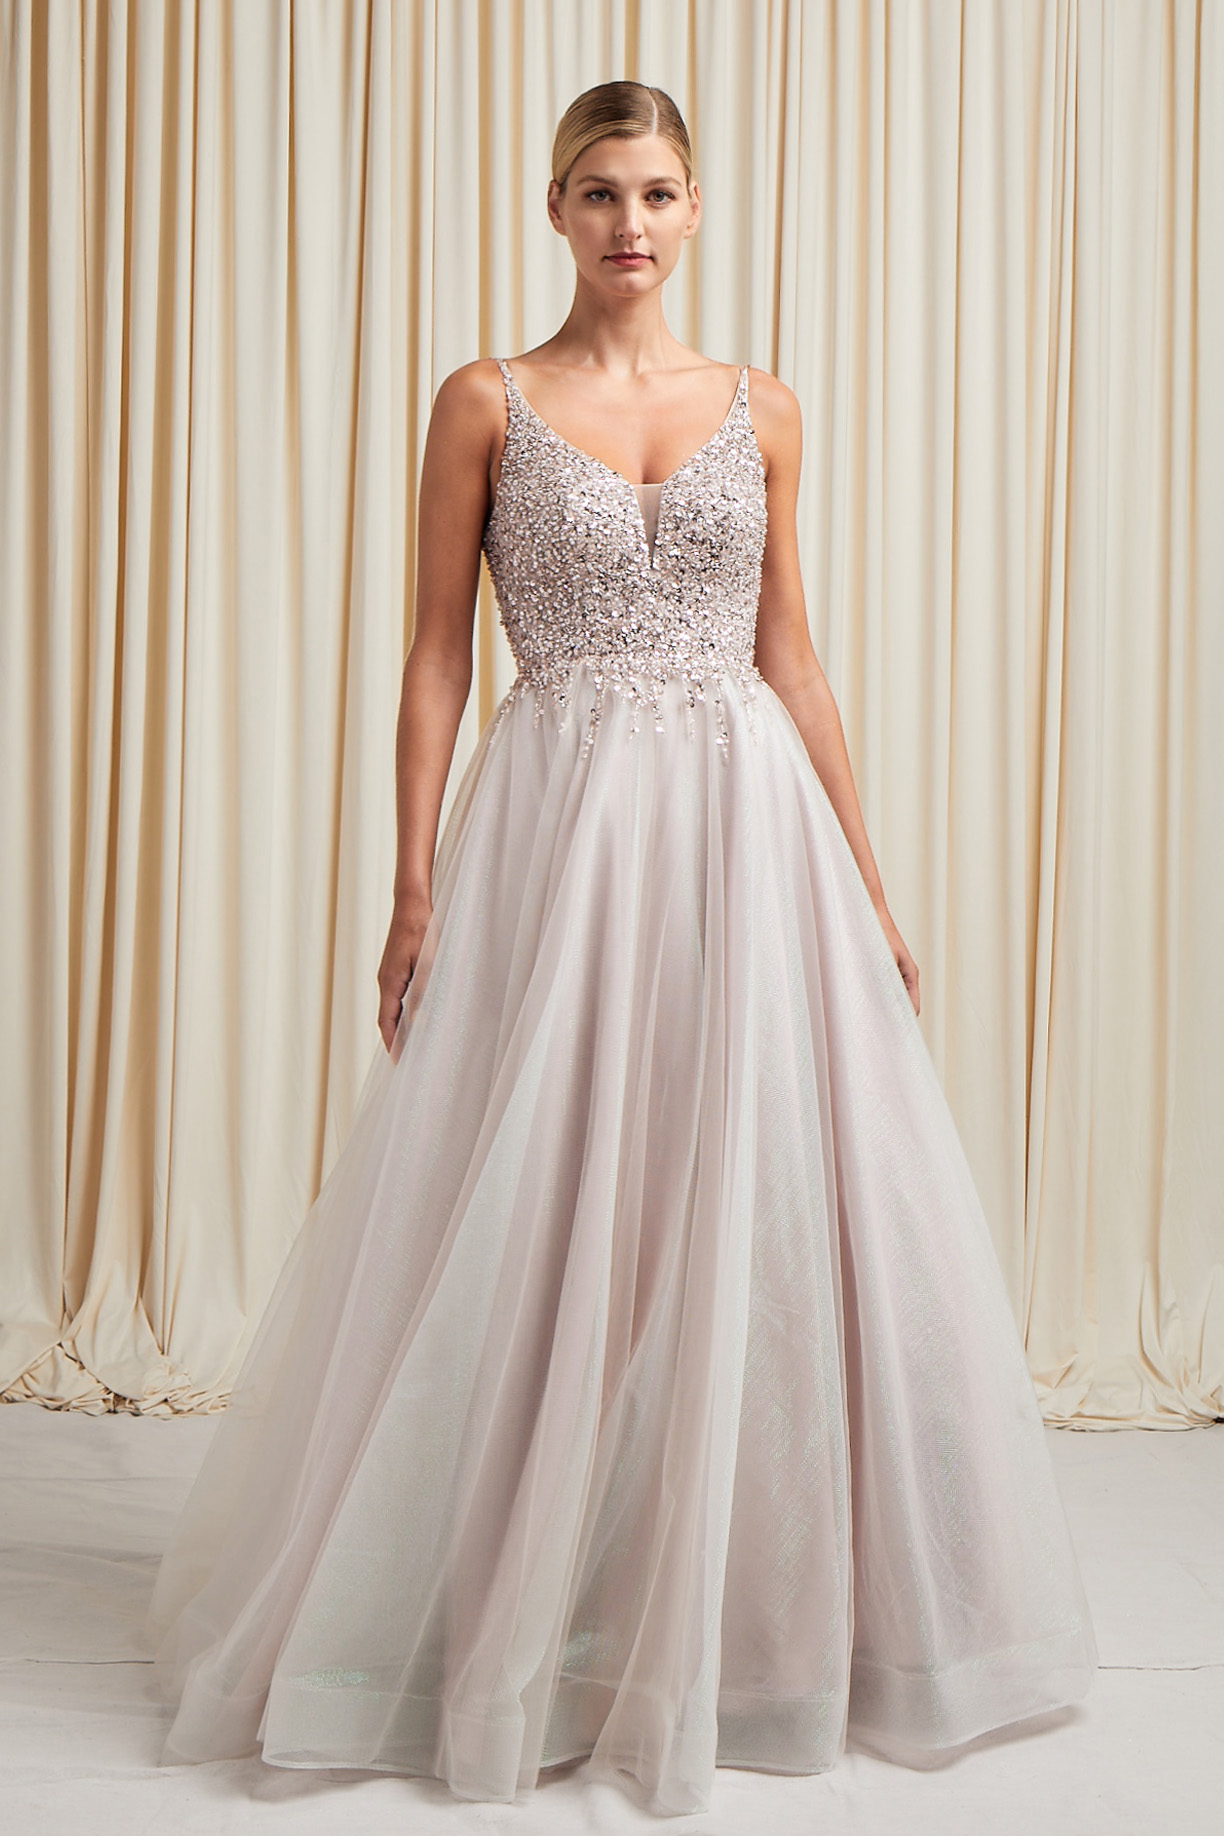 SWEETHEART, STRAPLESS, LACE-UP, BALL GOWN